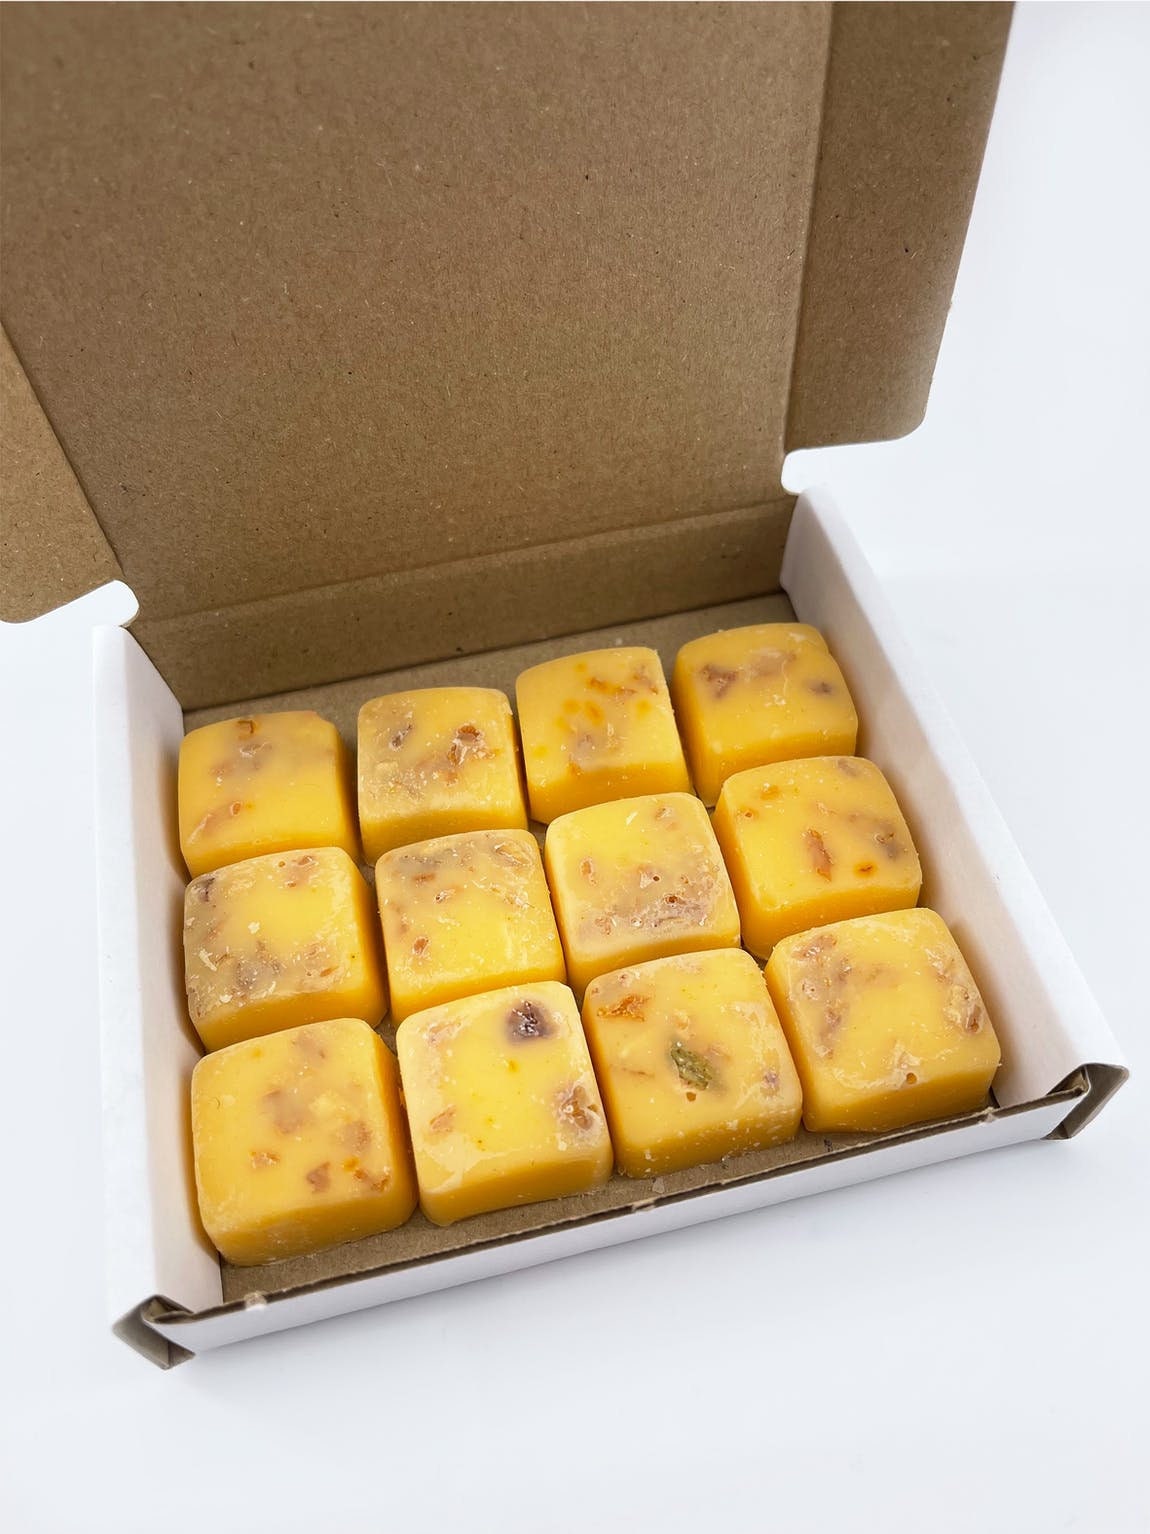 Sweet Candied Fruit Wax Melts, Winter Edition , 12 cubes 90g total - Funky Soap Shop